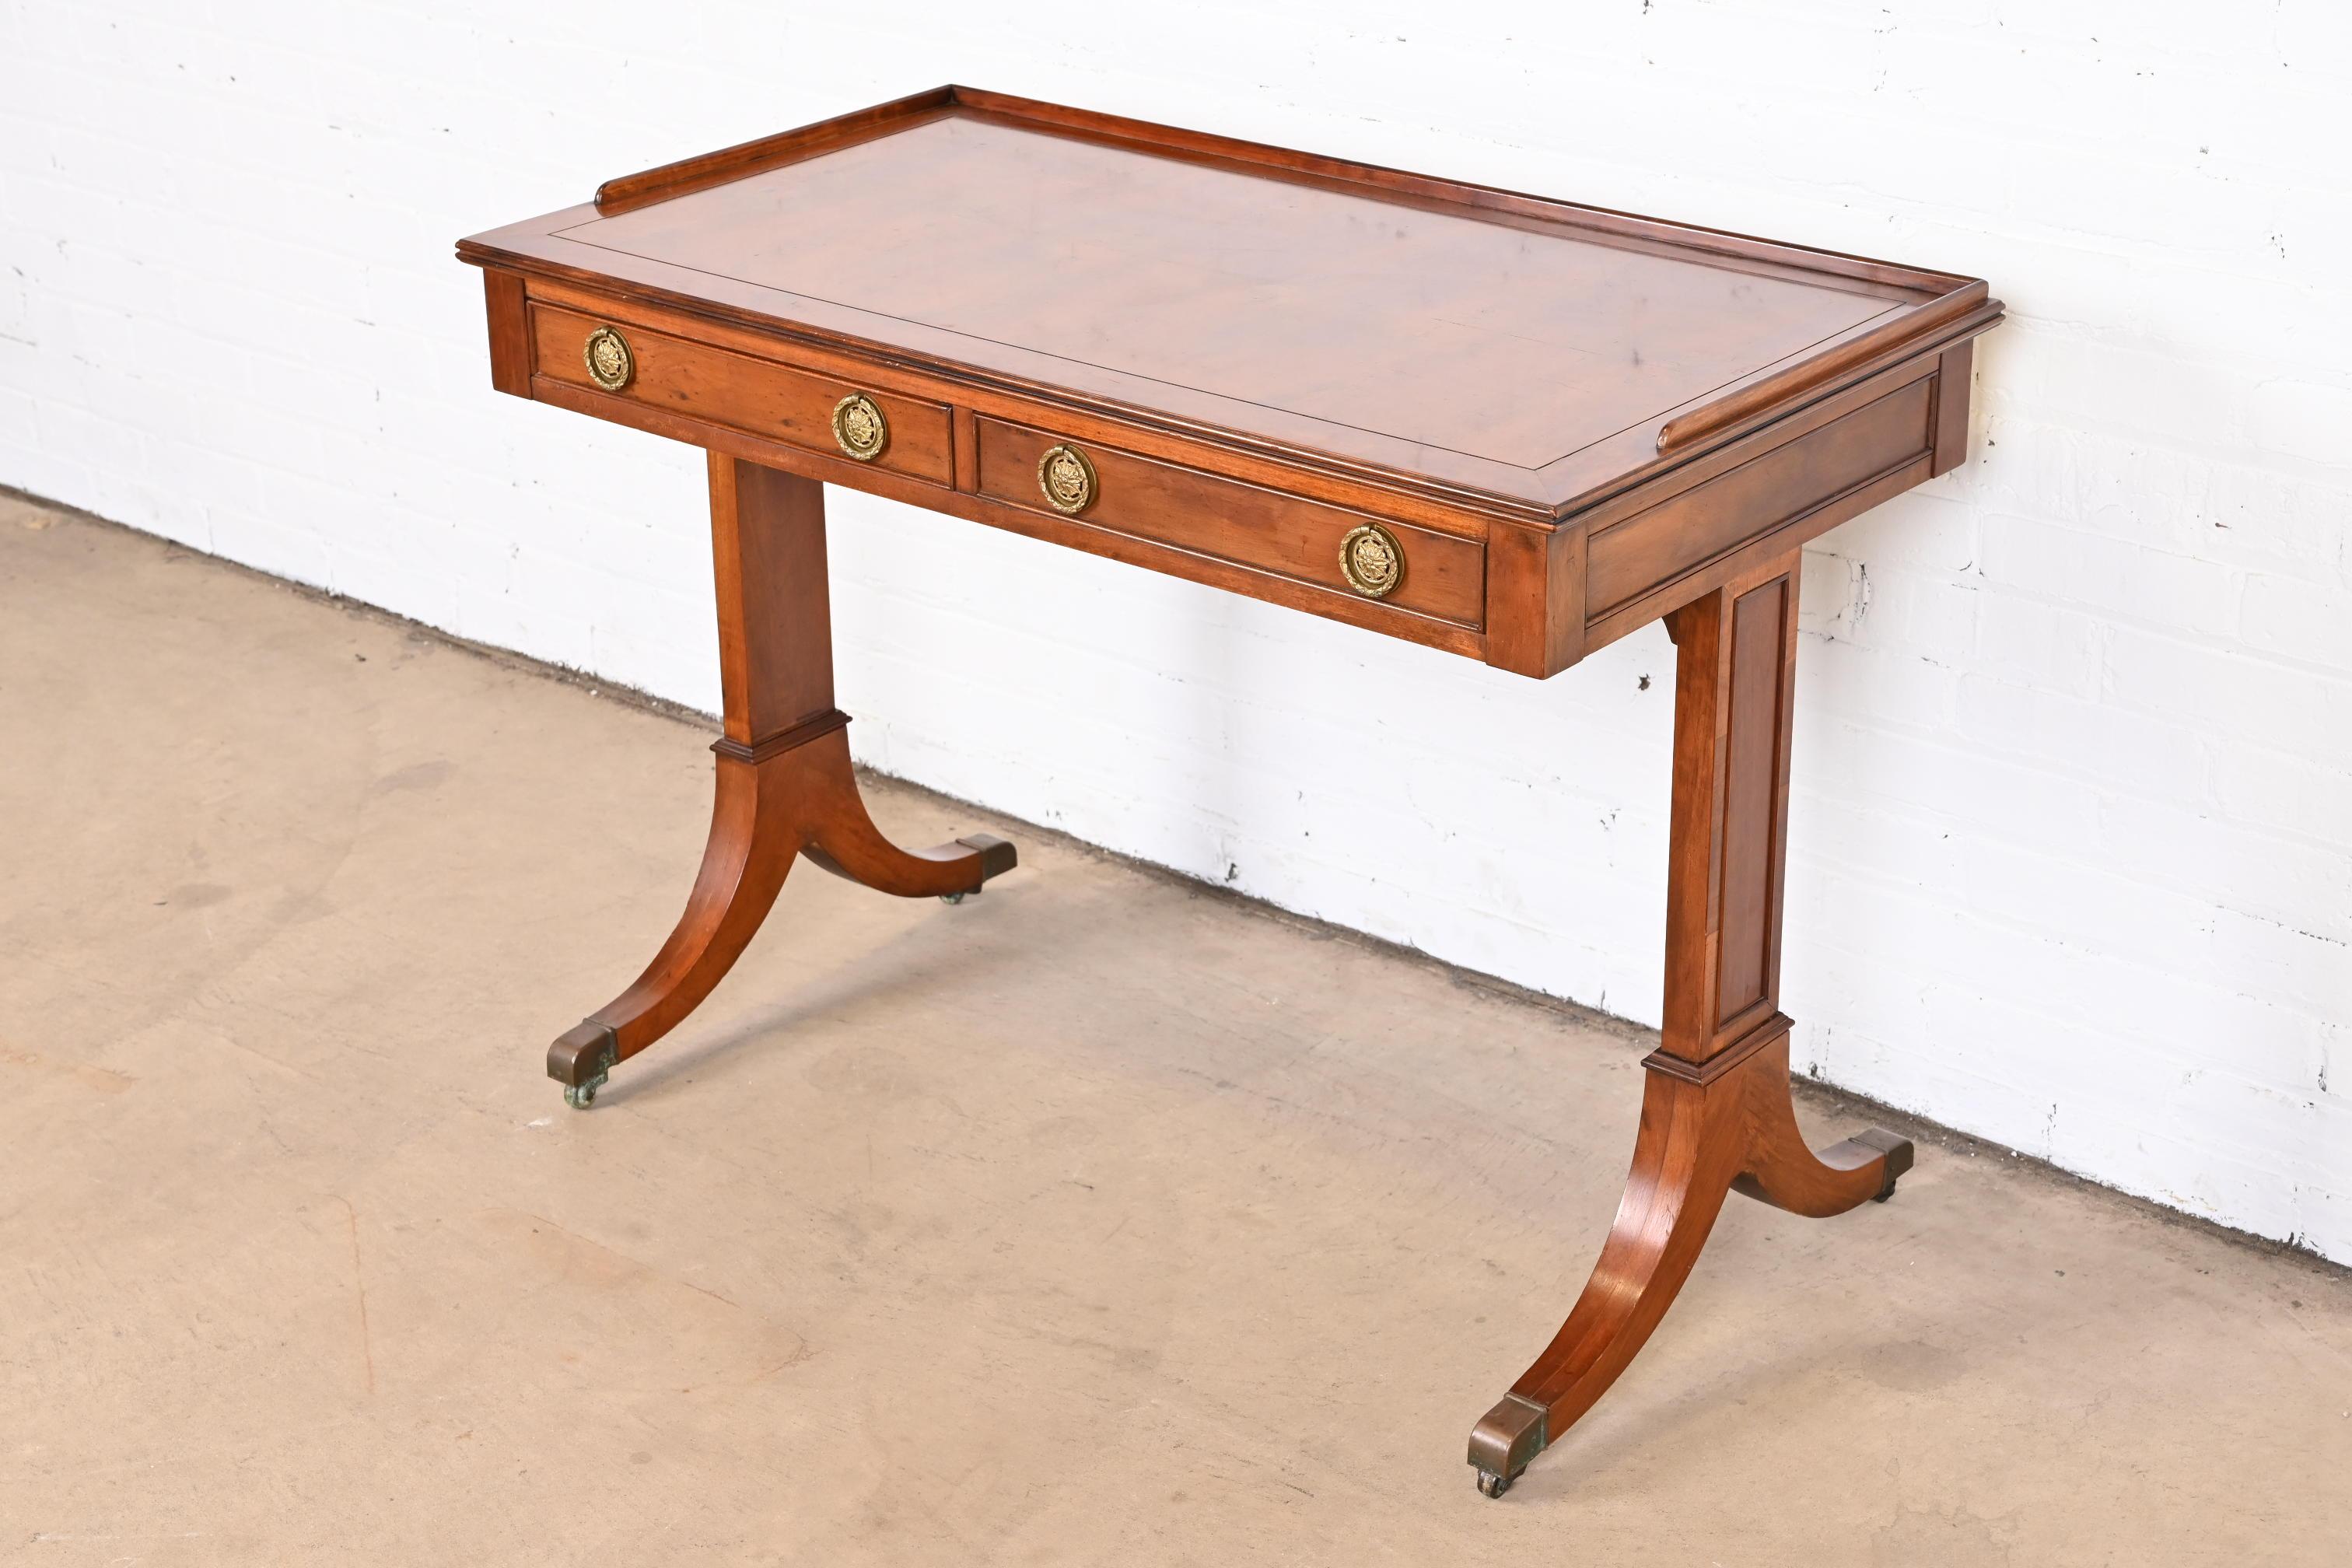 20th Century English Regency Yew Wood Desk or Console in the Manner of Baker Furniture